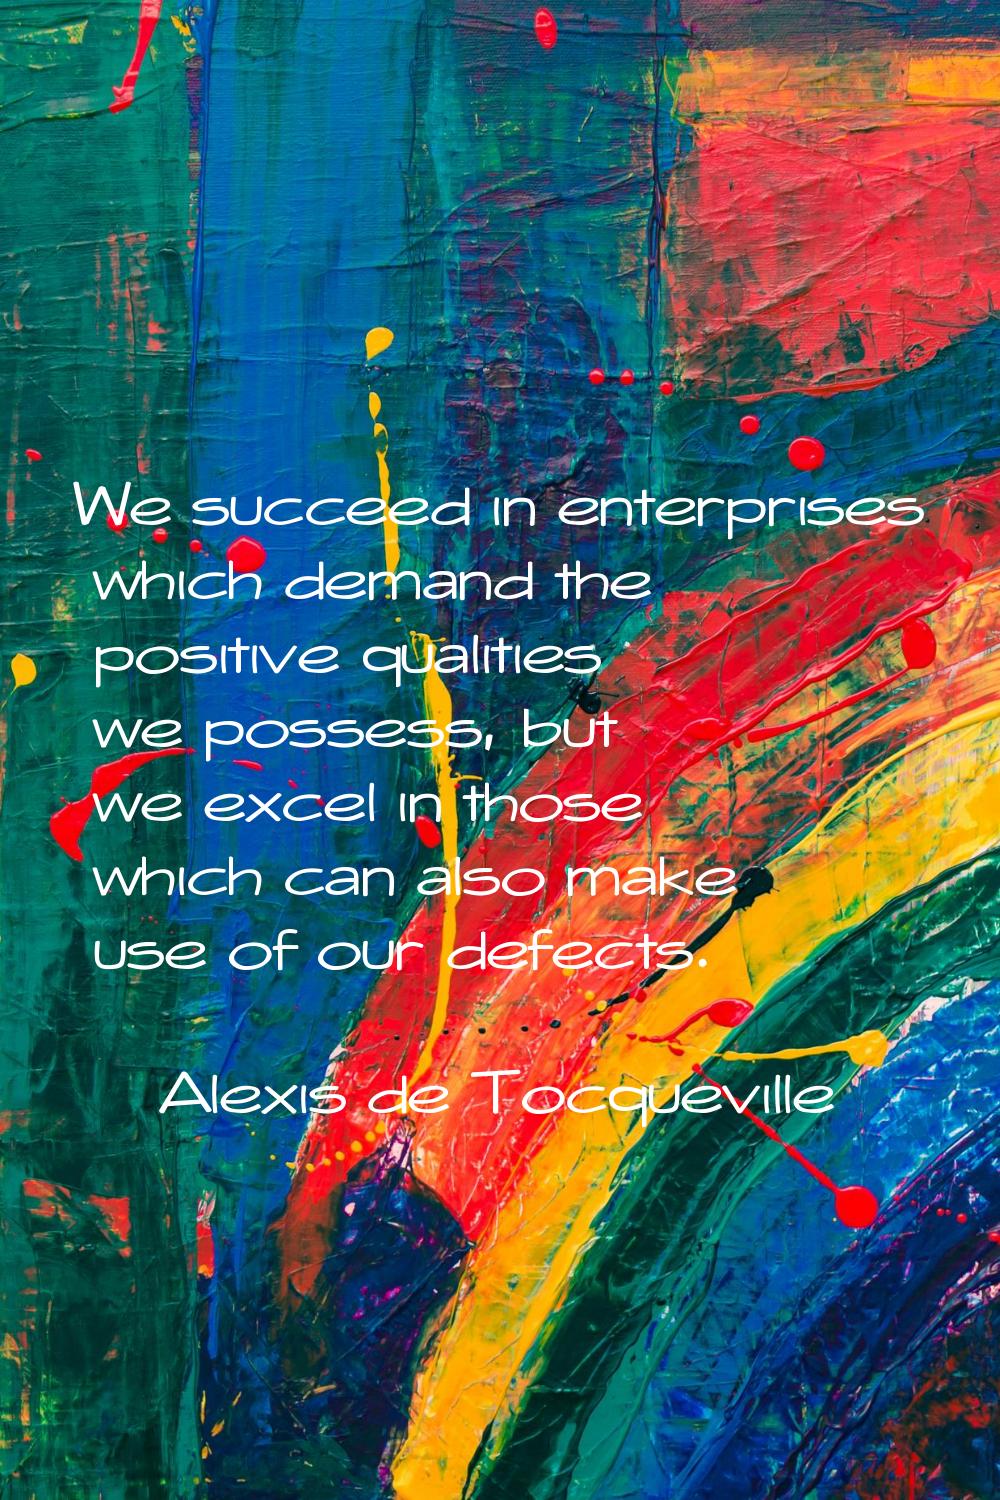 We succeed in enterprises which demand the positive qualities we possess, but we excel in those whi